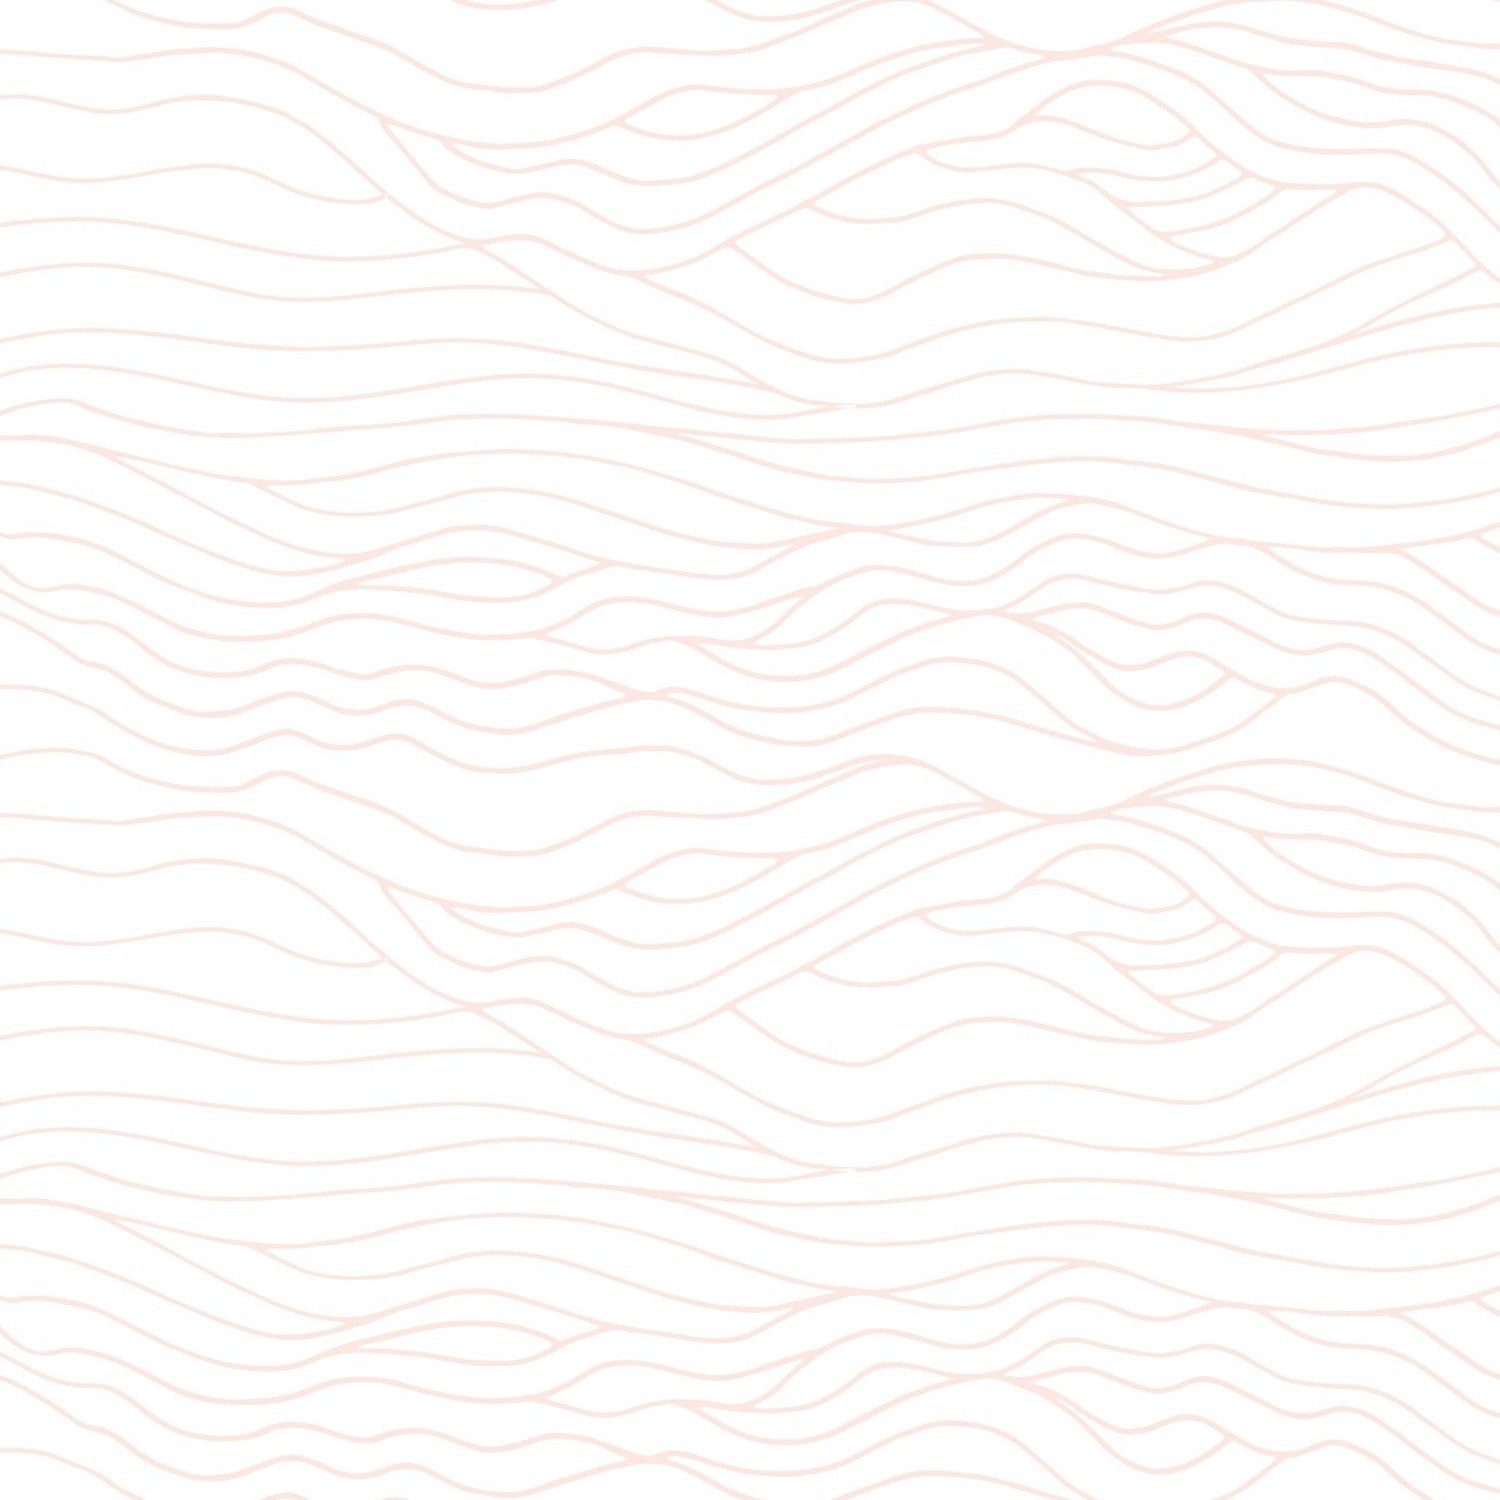 A seamless pattern of the Line Art Wave Wallpaper, showcasing gentle wavy lines in a soft pink hue that give the impression of serene waves, creating a calming and elegant texture on a white background.